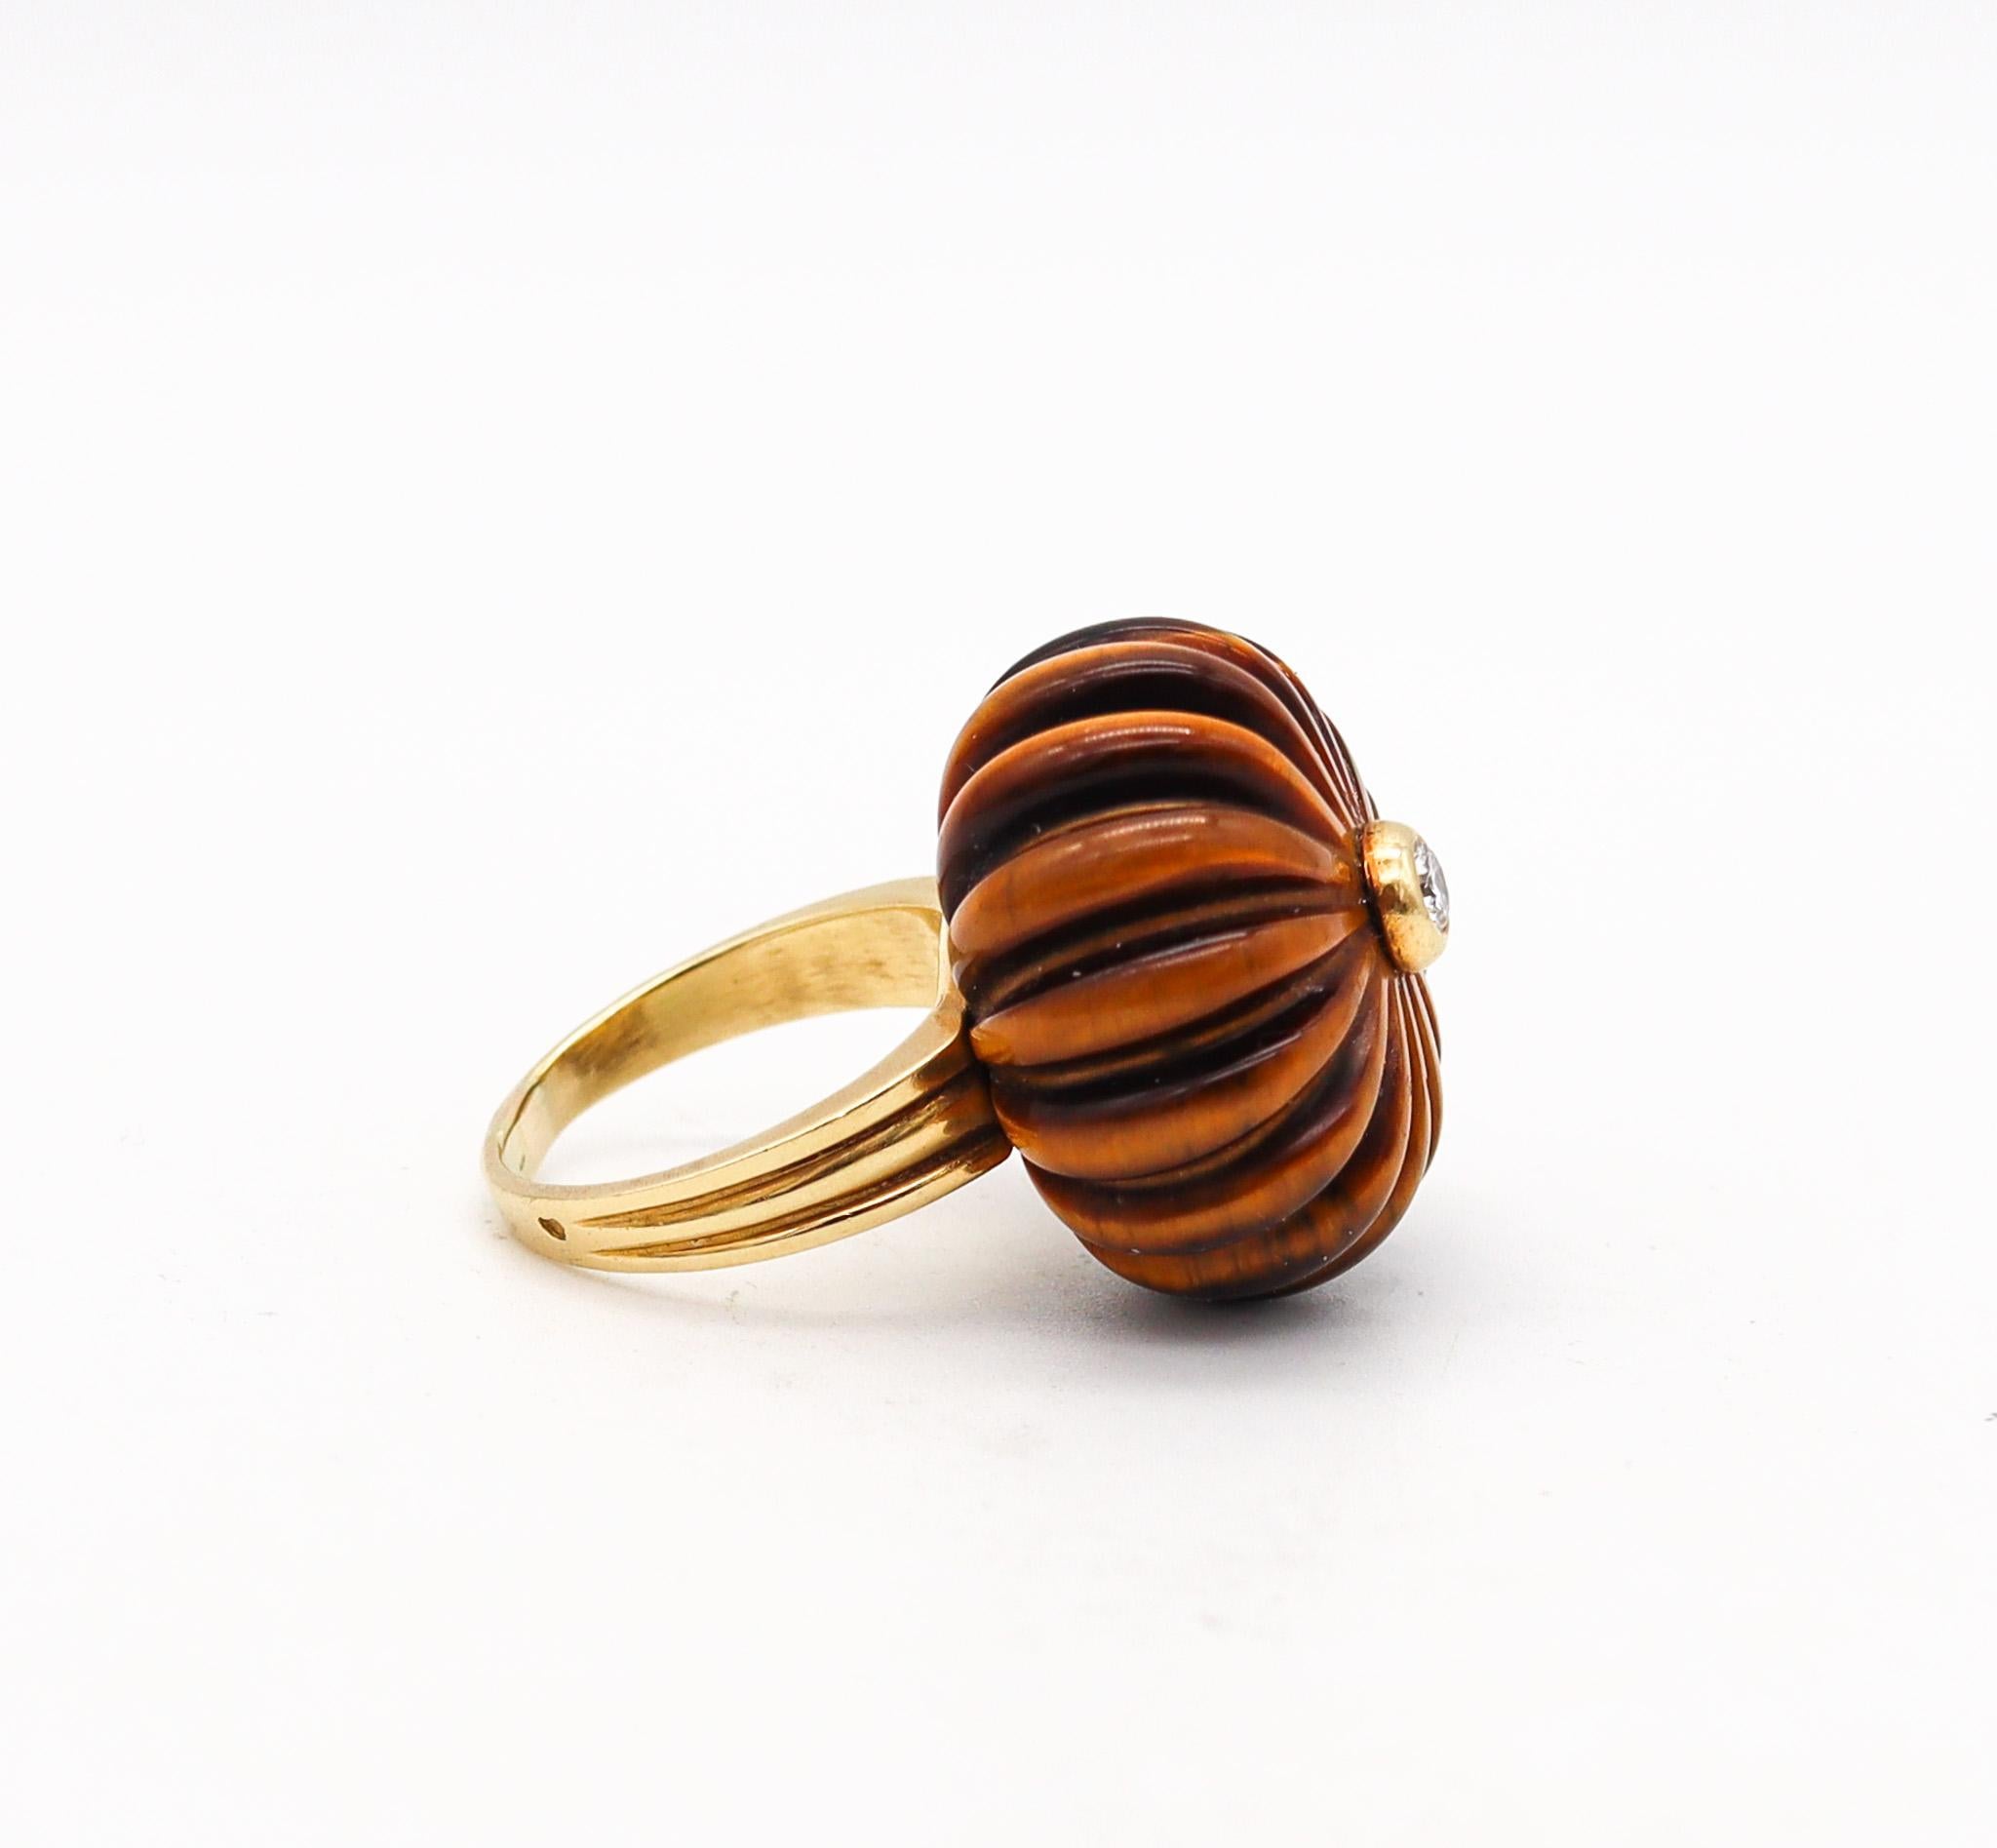 Brilliant Cut O. J. Perrin Paris 1970 By Andre Vassort Tiger Eye Ring 18Kt Gold With Diamond For Sale